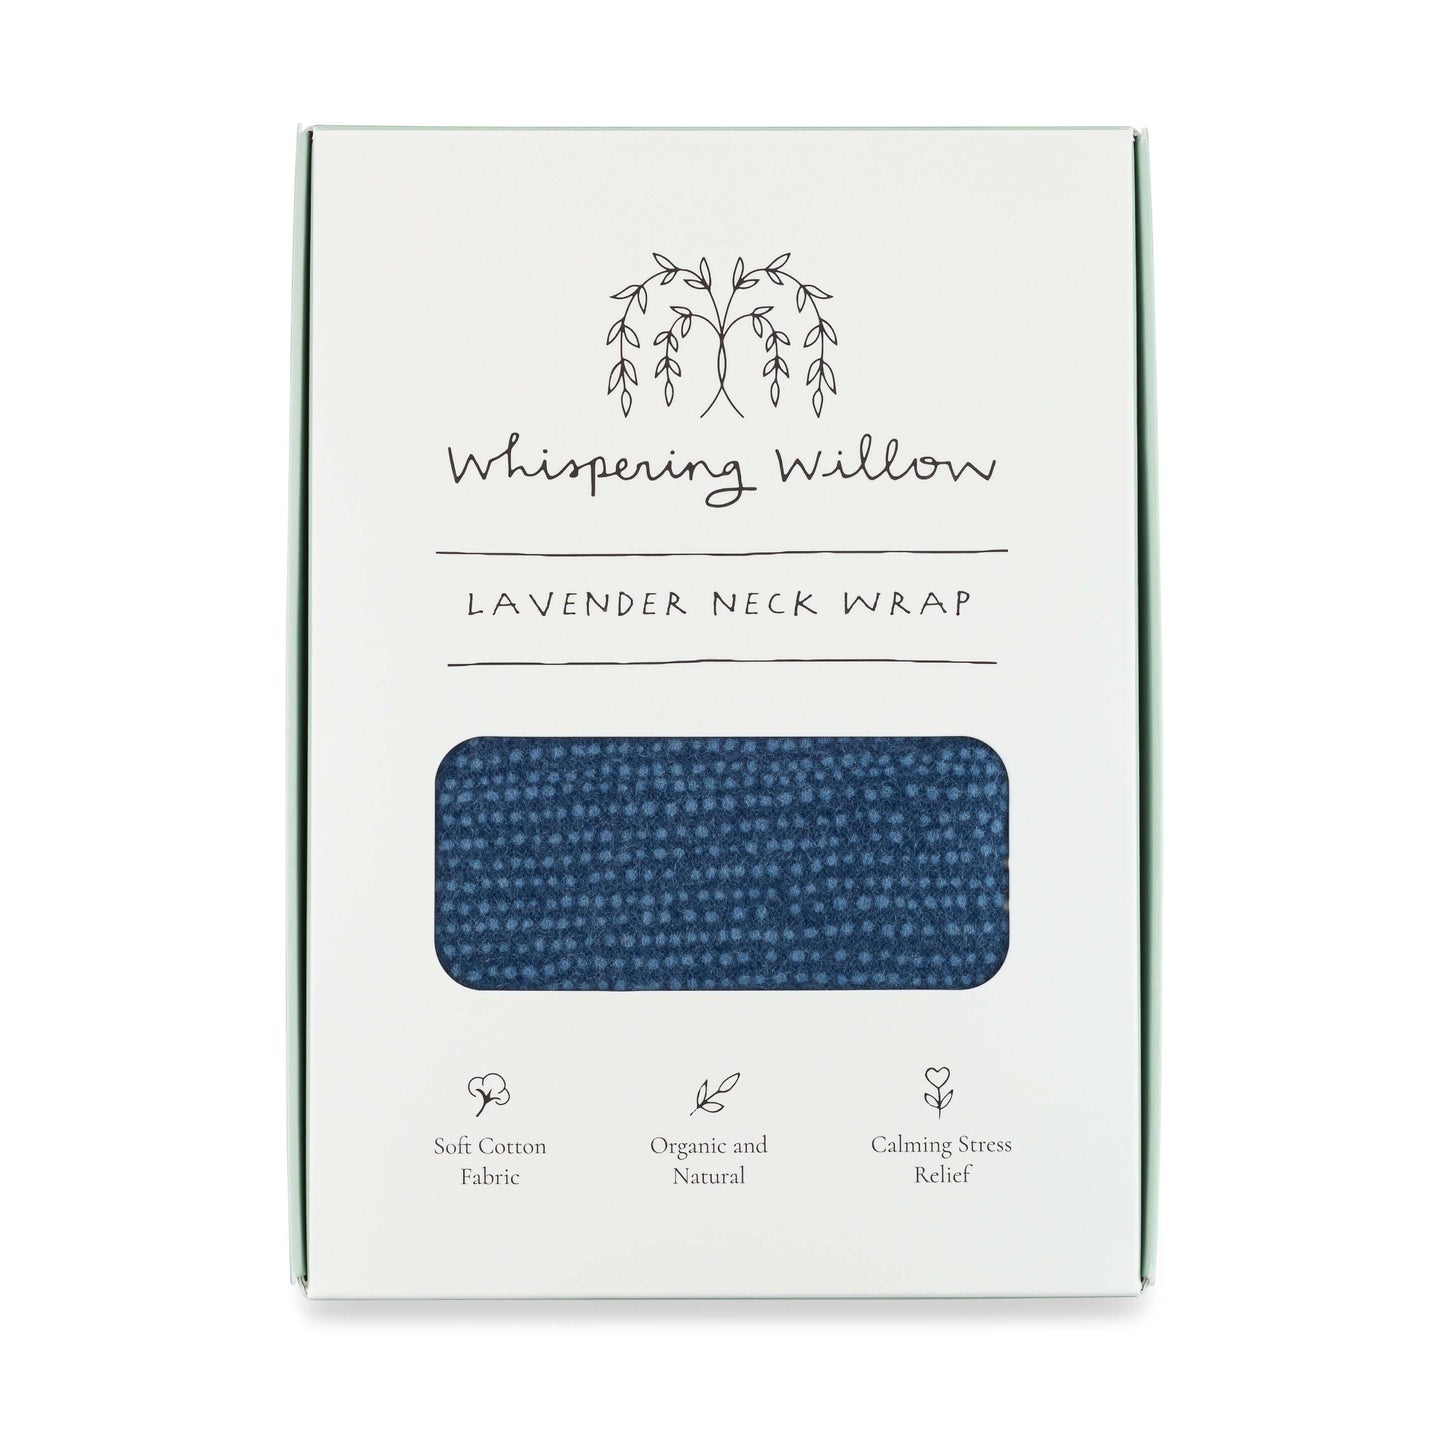 Whispering Willow - Neck Wrap, Lavender - Deep Blue - Boxed